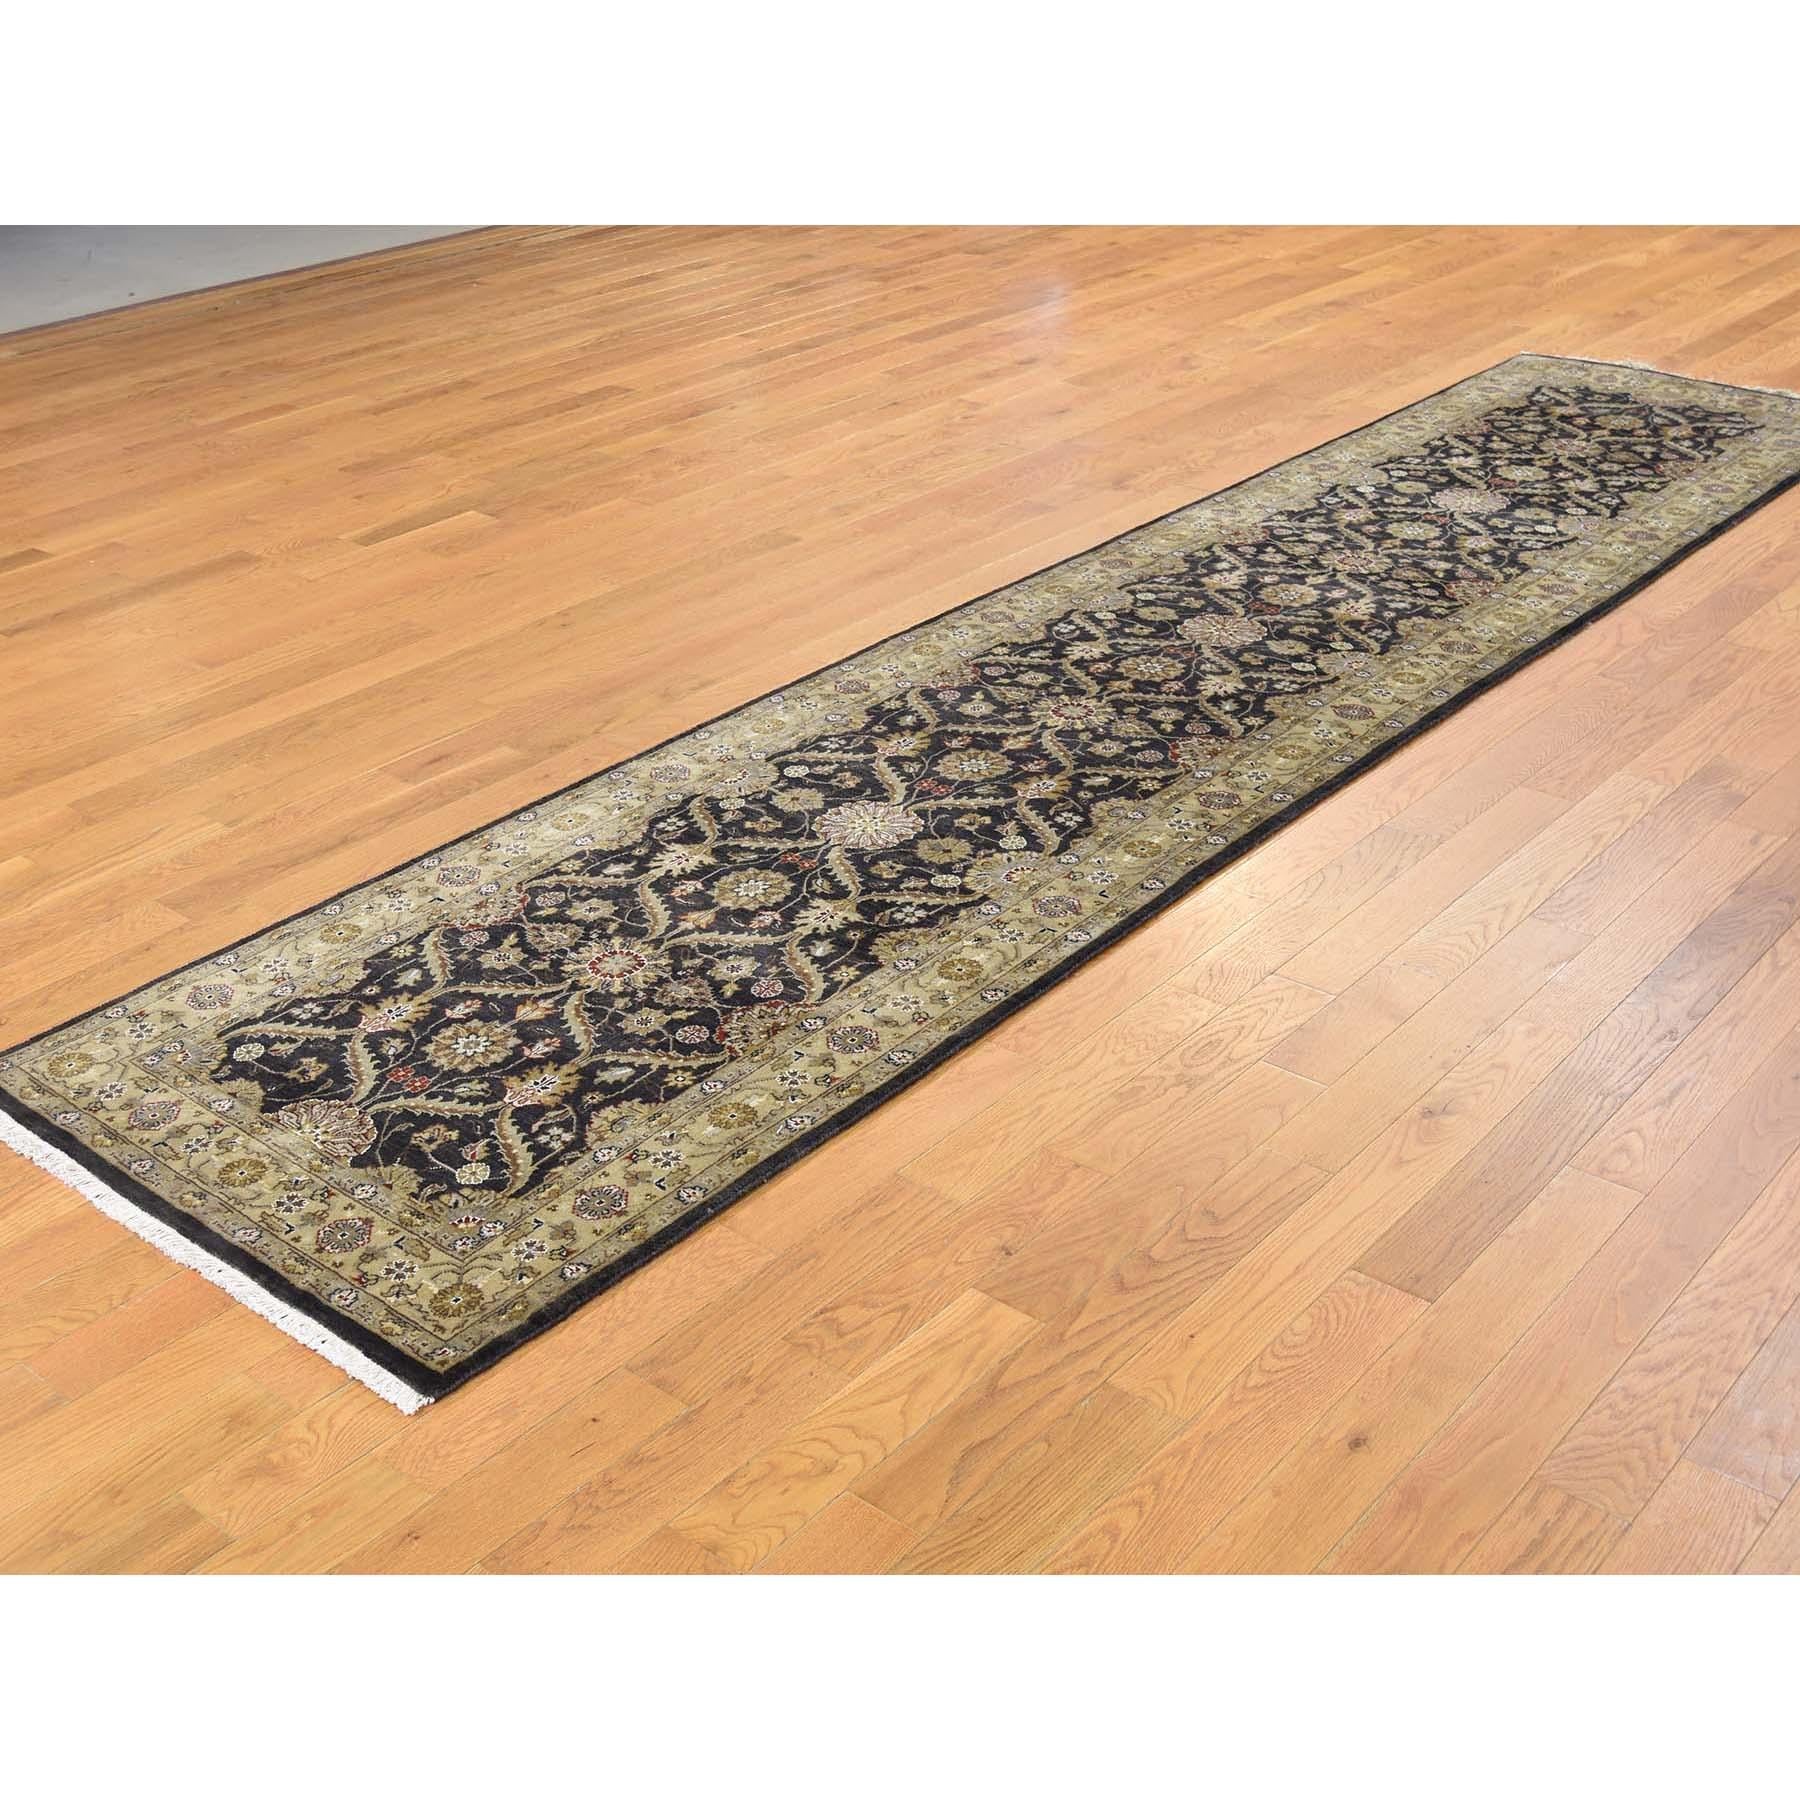 Other Hereke Design Wool and Silk Hand Knotted 300 Kpsi Runner Rug